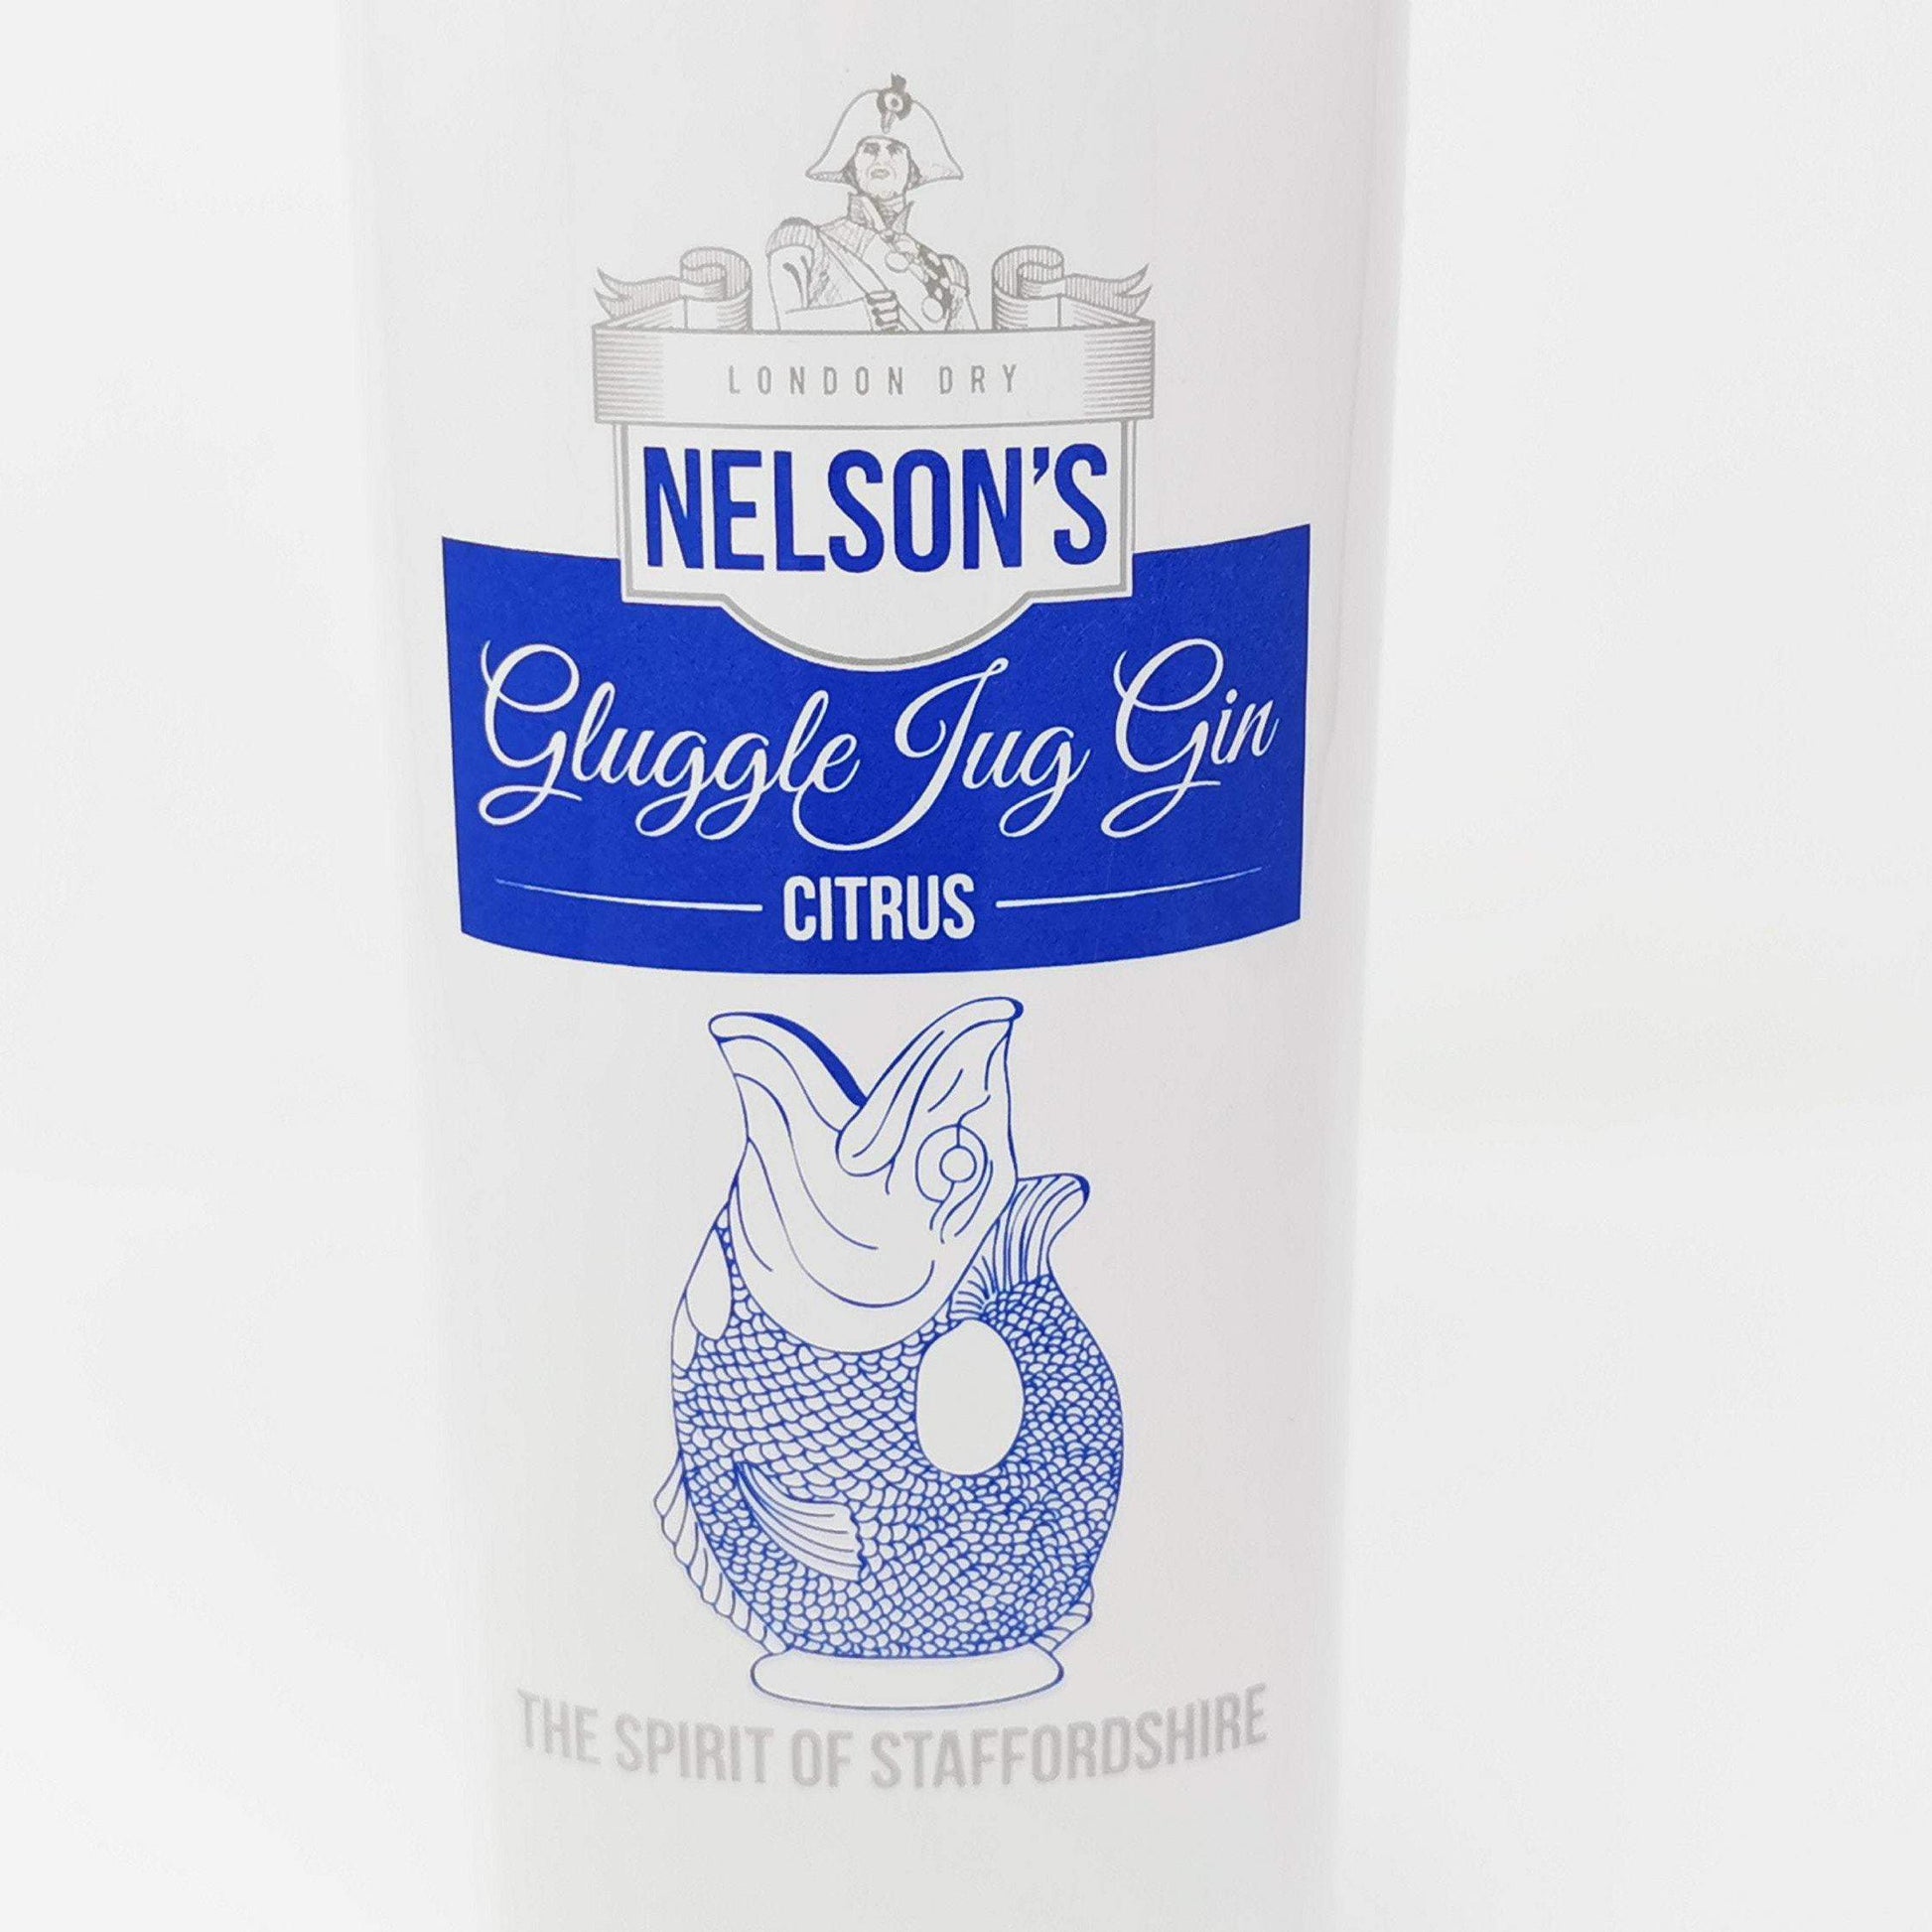 Nelsons Gluggle Jug Gin Bottle Candle-Gin Bottle Candles-Adhock Homeware